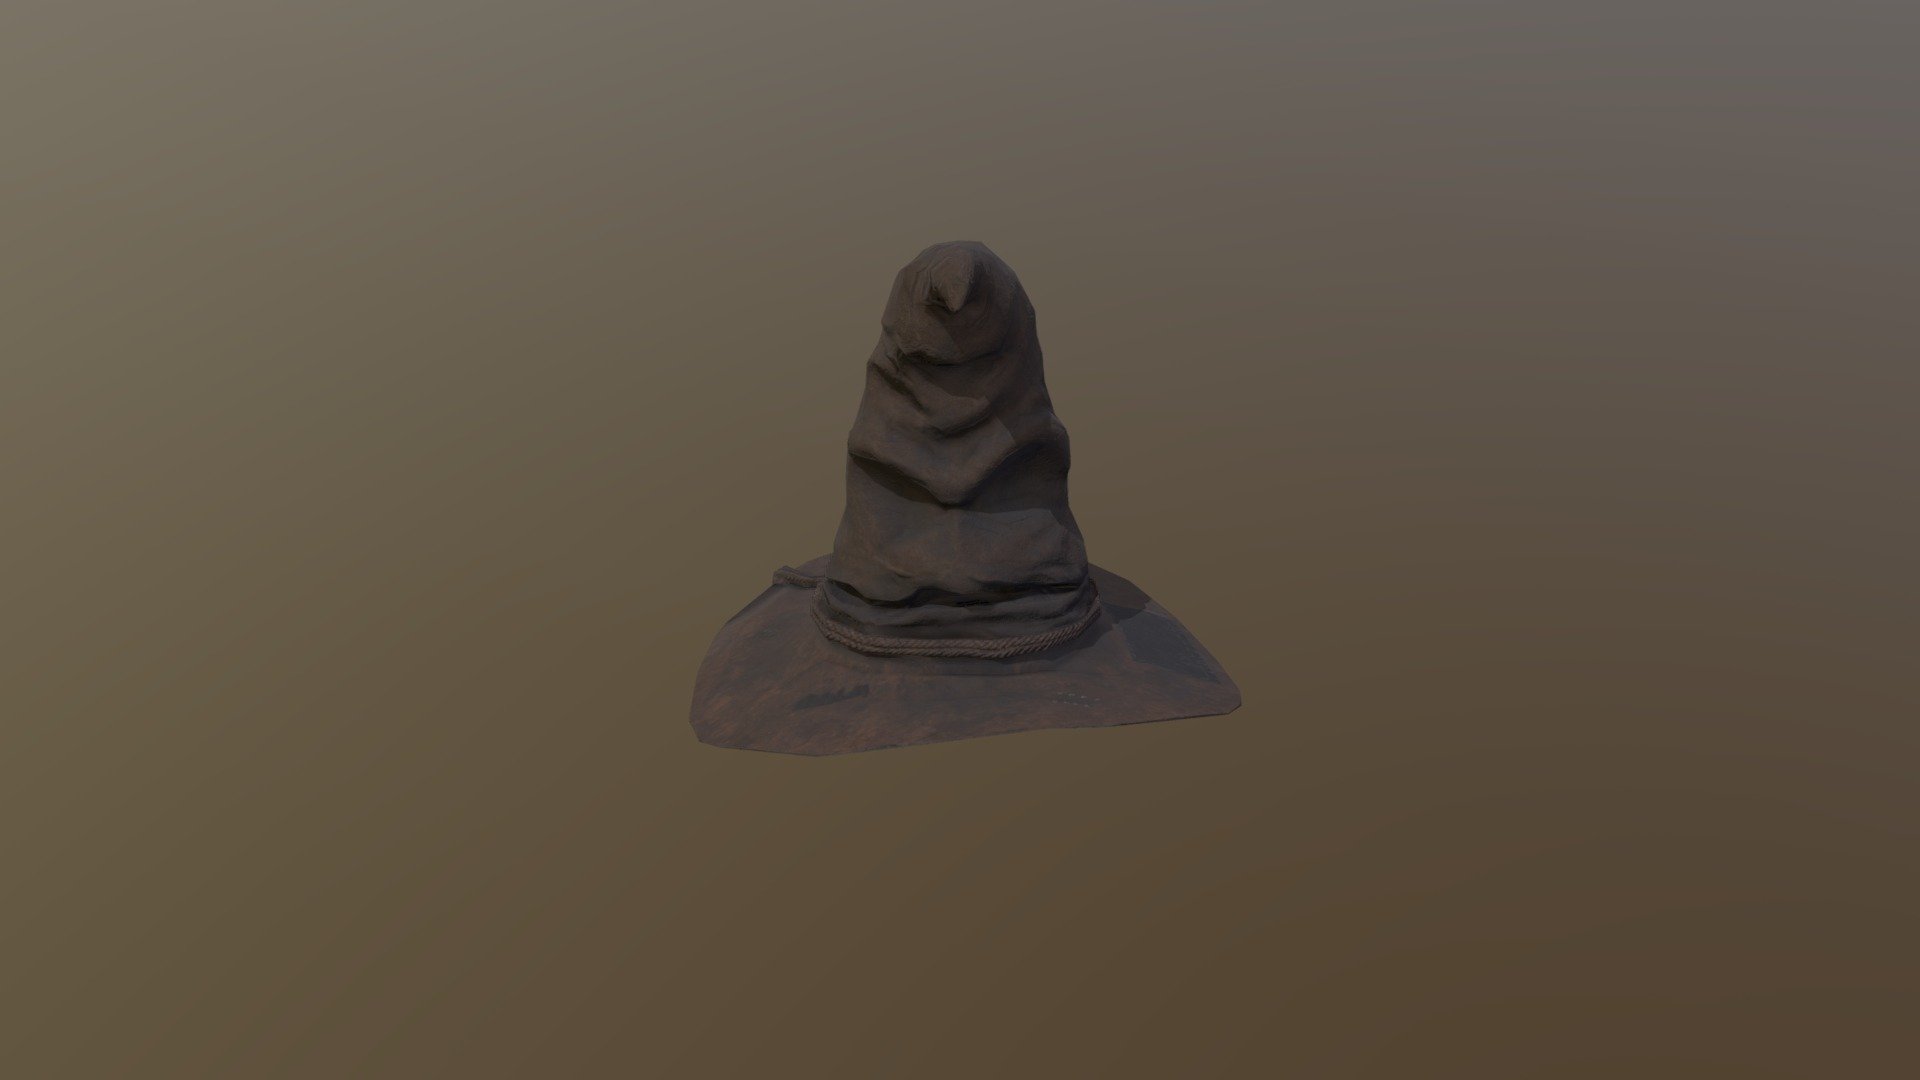 Fan art of Sorting Hat from the Harry Potter series. Did this just for practice.
Do not use this for commercial purpose - Sorting Hat Fan Art - Download Free 3D model by Arham Mustafa Chaudhry (@ratx1) 3d model